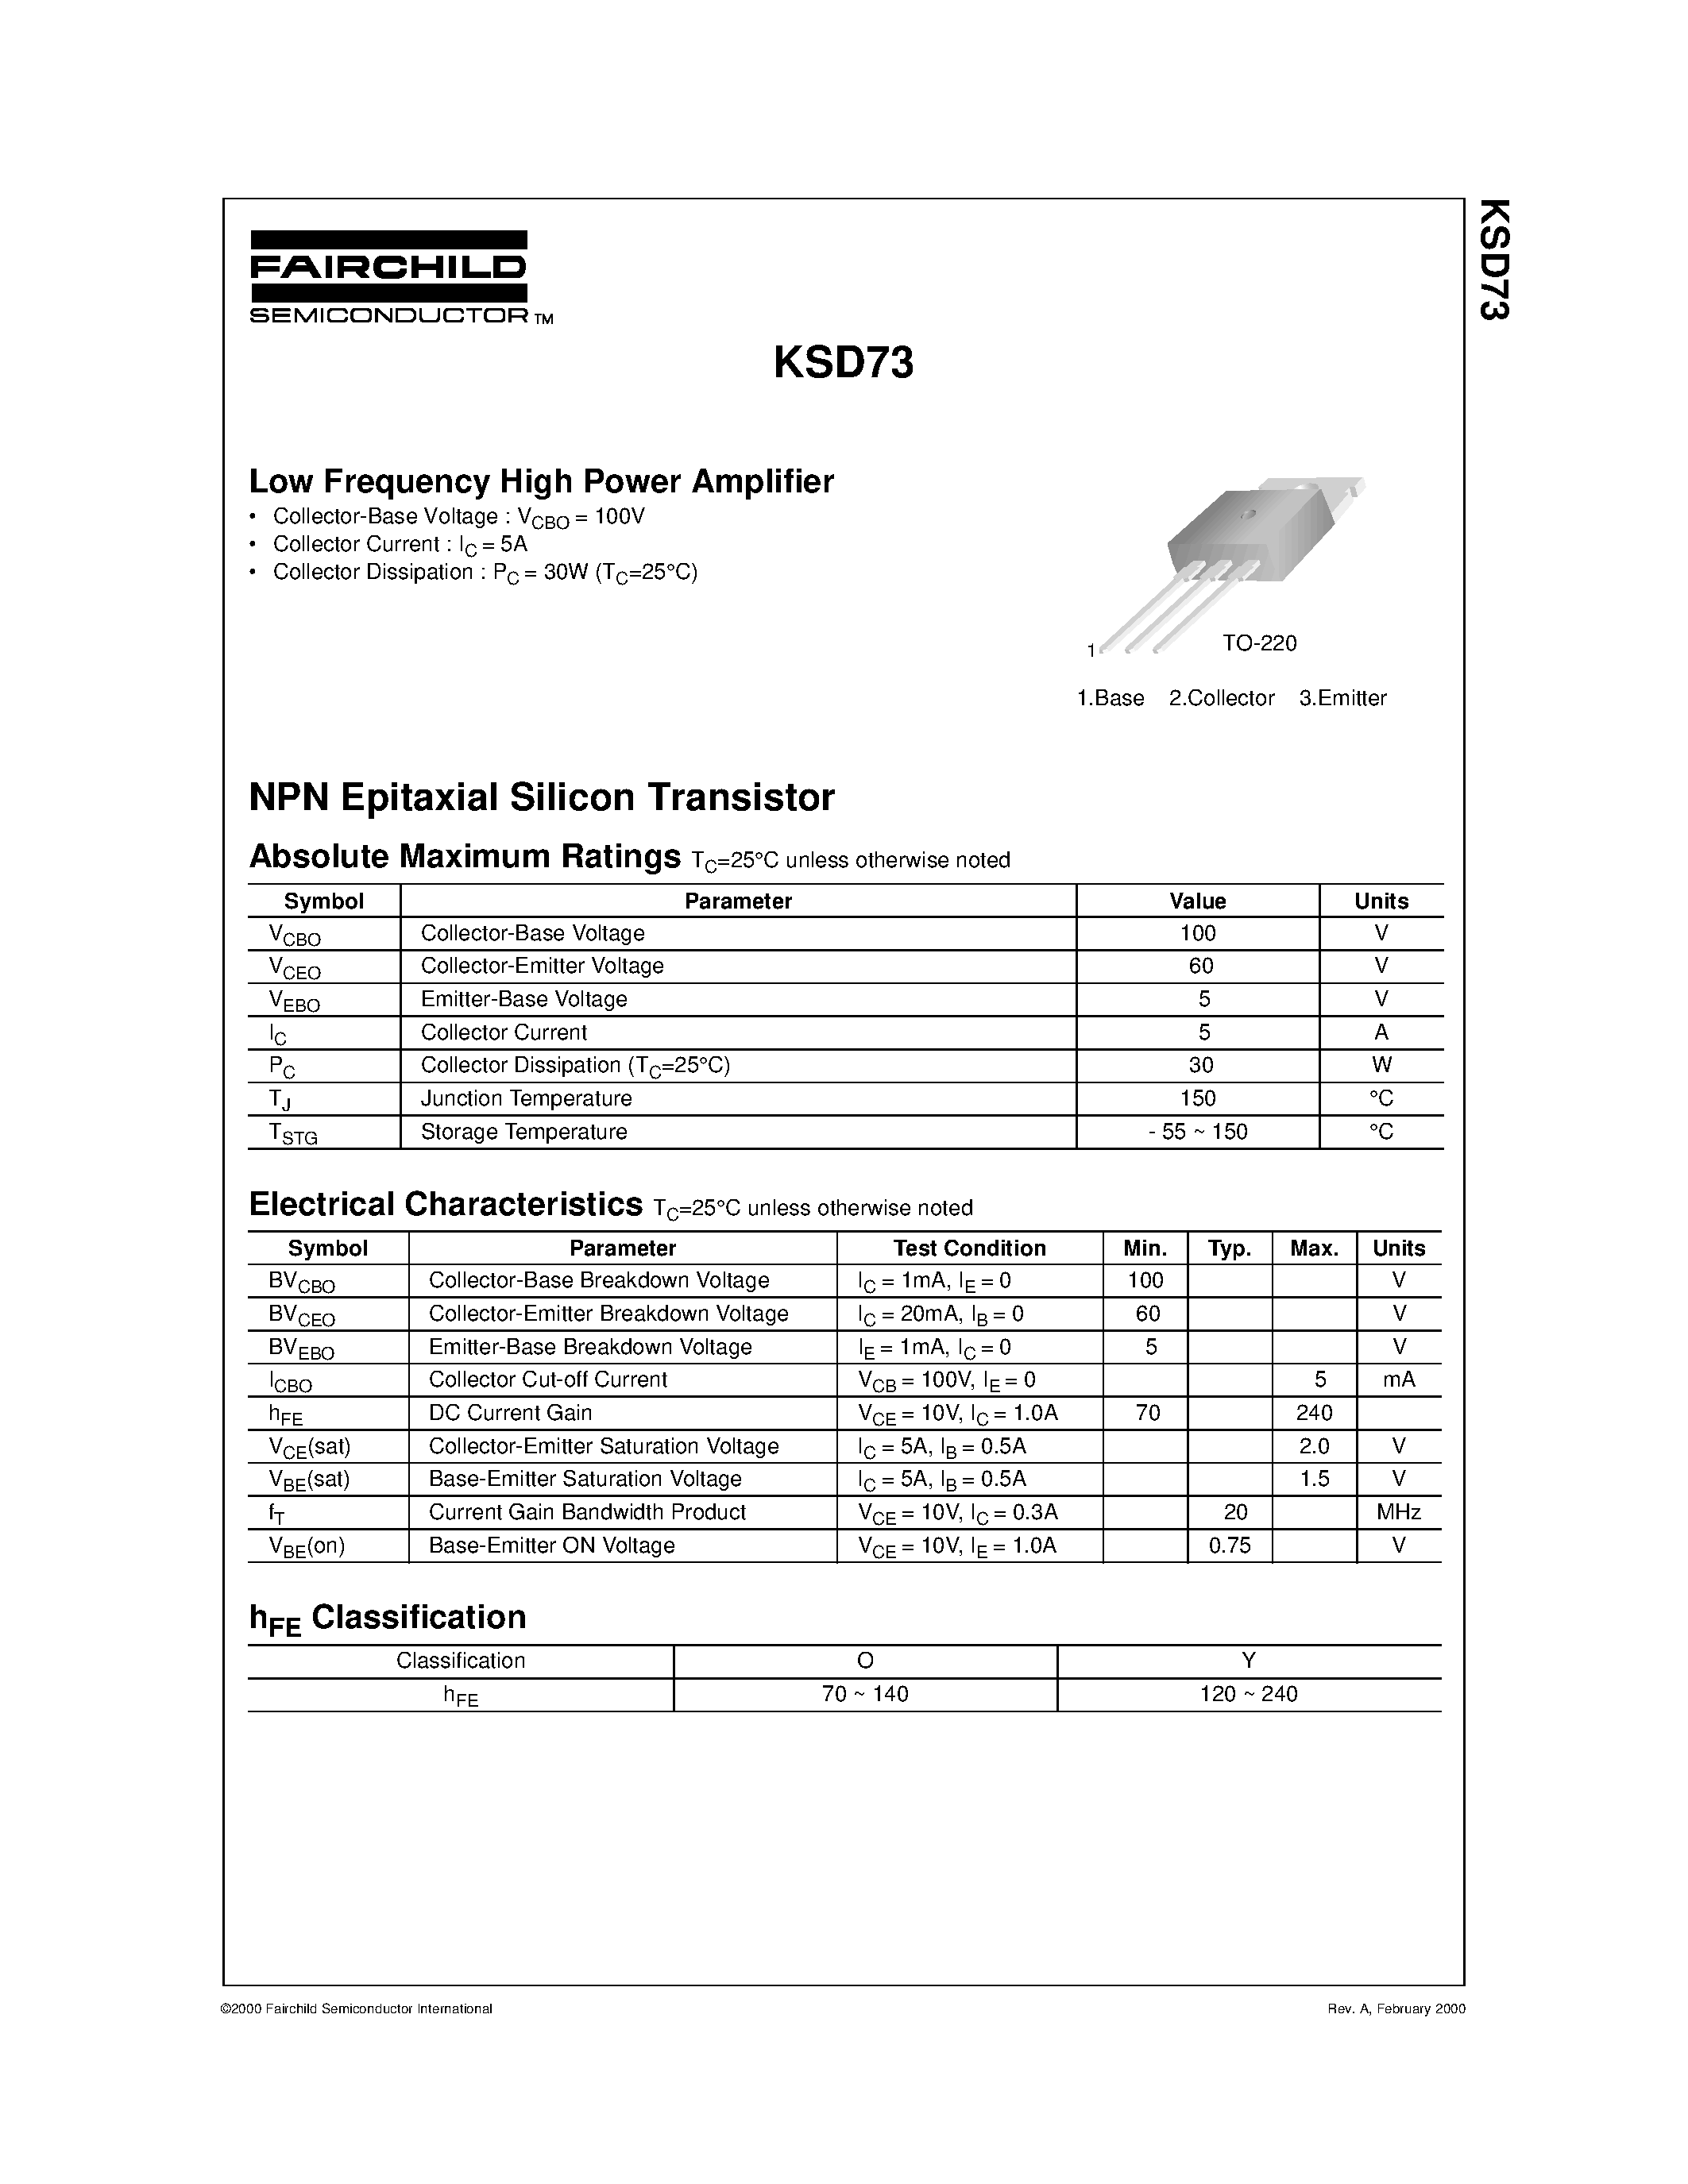 Datasheet KSD73 - Low Frequency High Power Amplifier page 1